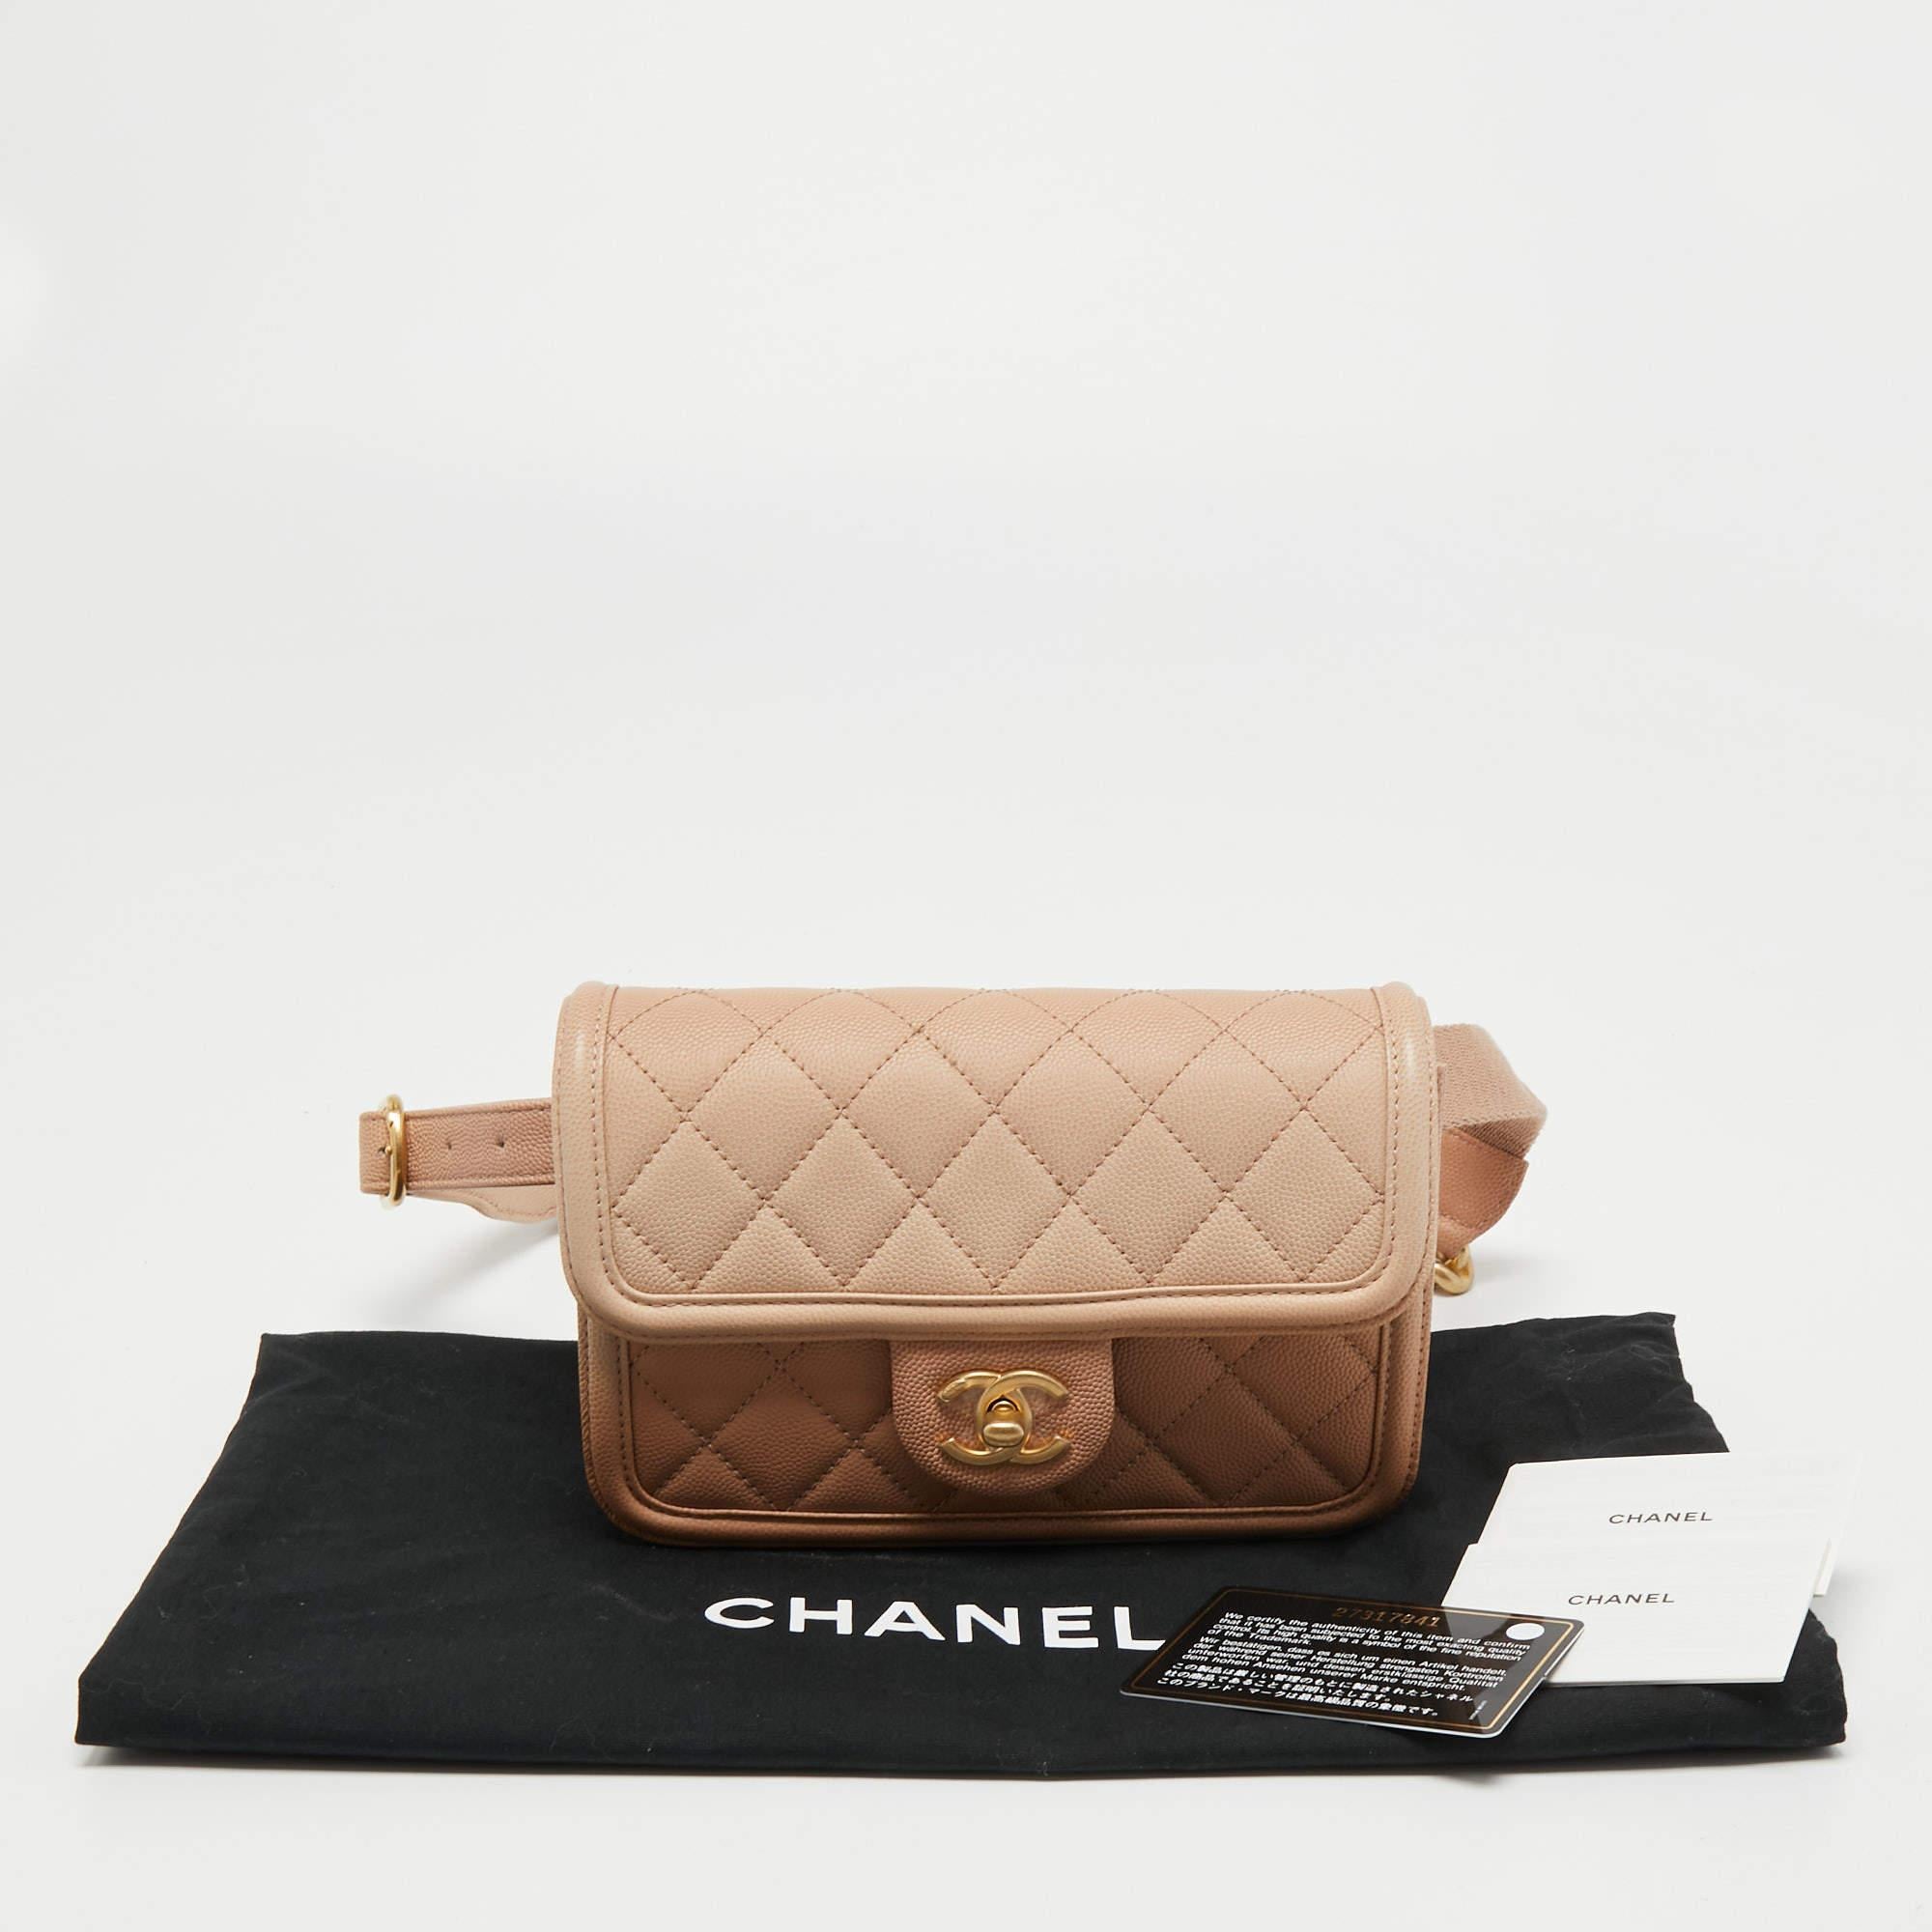 Chanel Beige Ombre Quilted Caviar Leather Sunset On The Sea Belt Bag 2